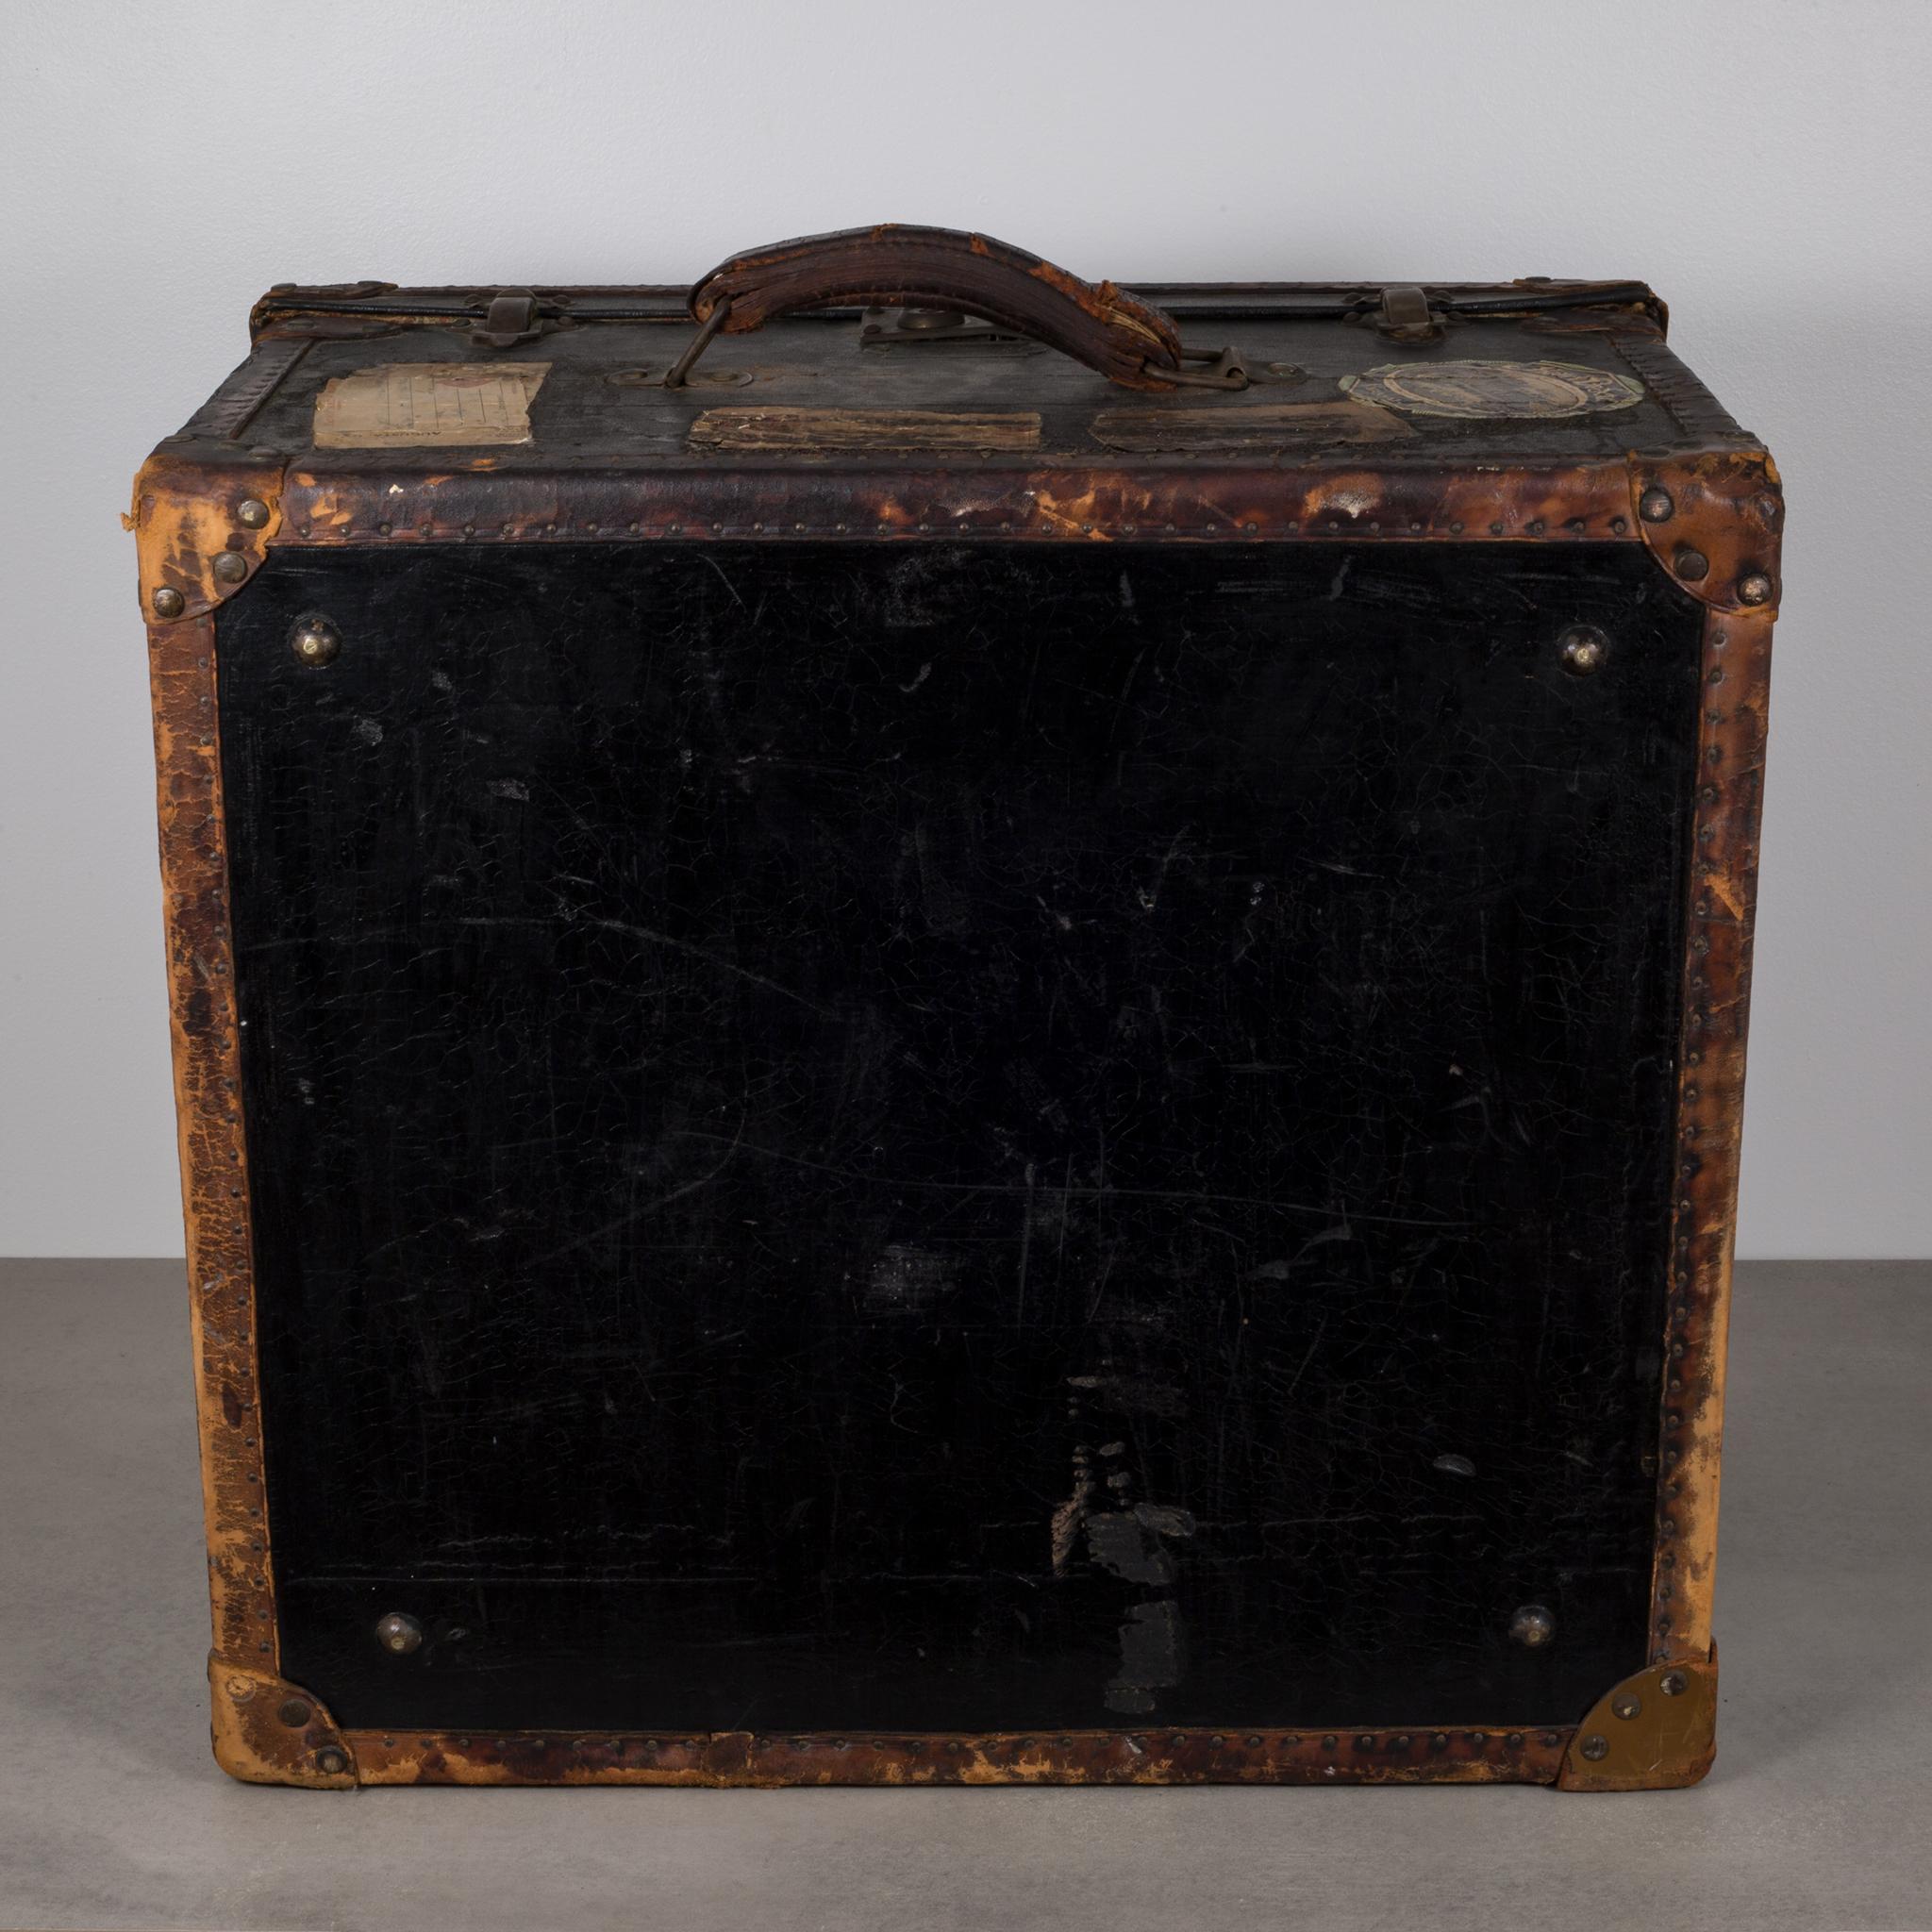 Industrial Old England Leather or Brass Luggage with Original Travel Stickers c.1900-1930